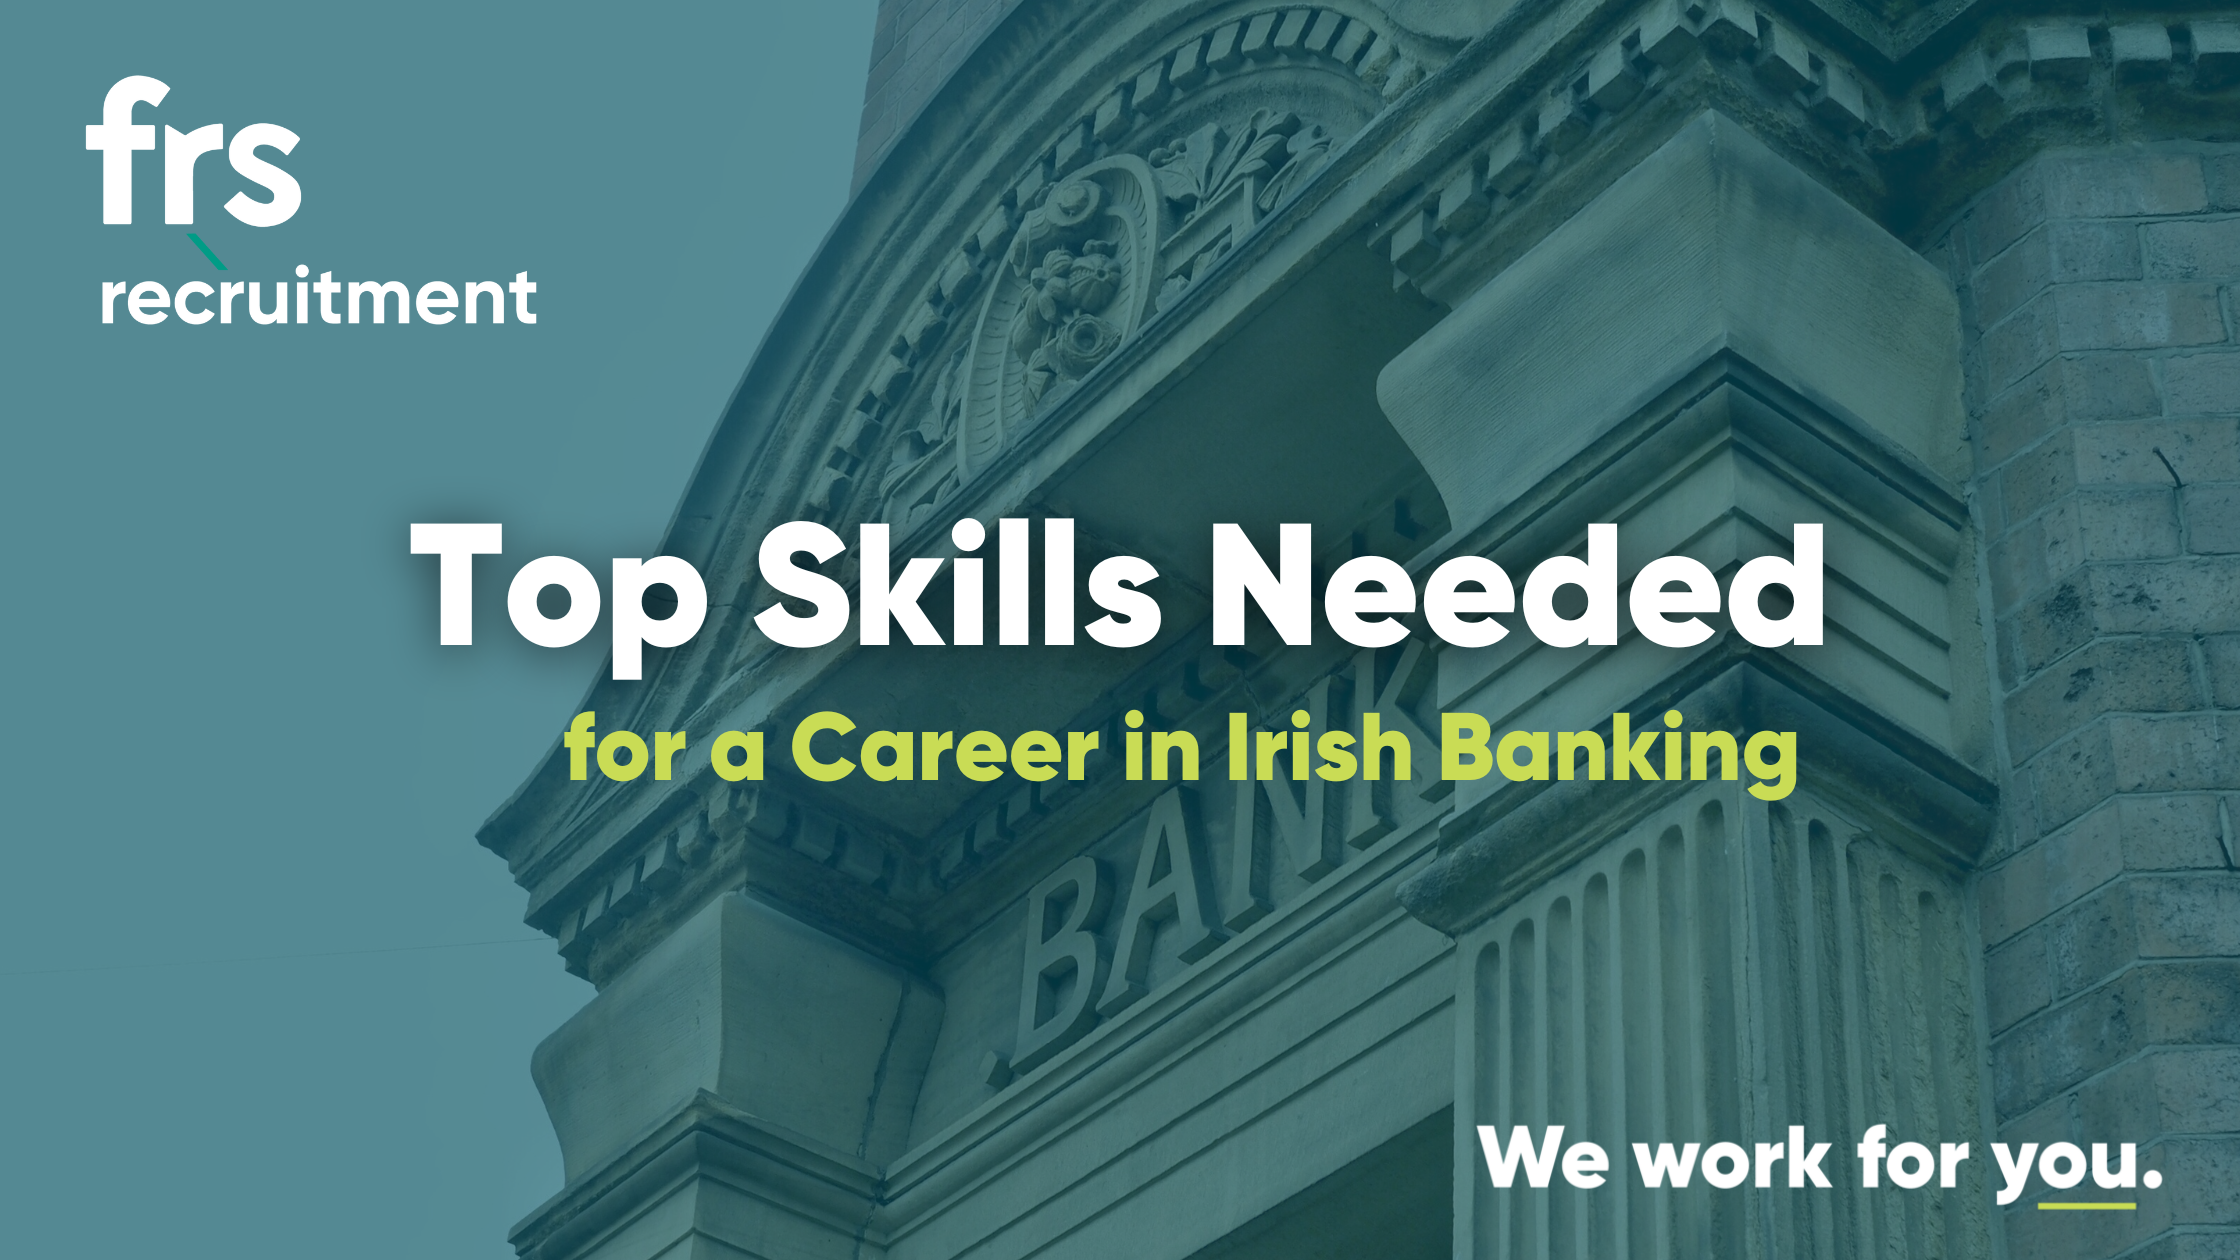 Top Skills Needed for a Career in Irish Banking